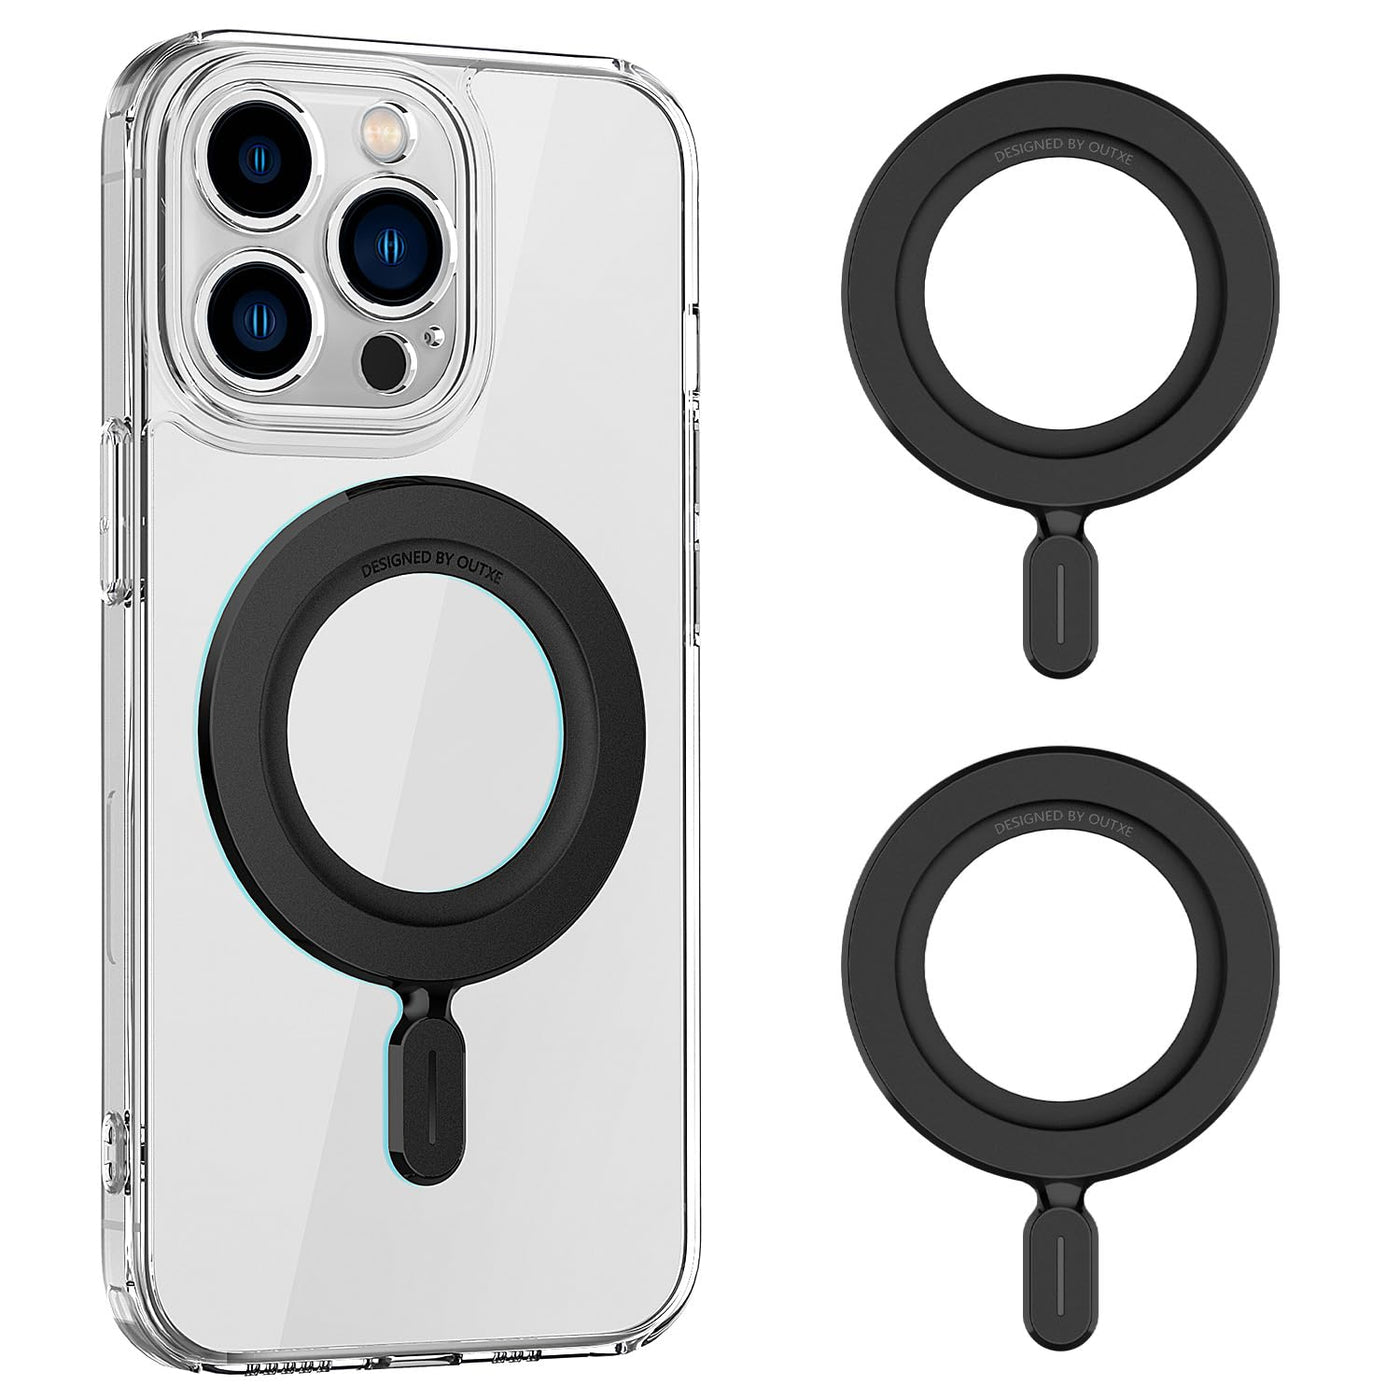 OUTXE Magnetic Ring Sticker, Universal Magnet Adapter Compatible with Magsafe Accessories, iPhone 14/13/12/11 Mini Plus Pro Max, Android Galaxy S23/S22/S21 Ultra, Pixel 7/6/5 and Cell Phone Case